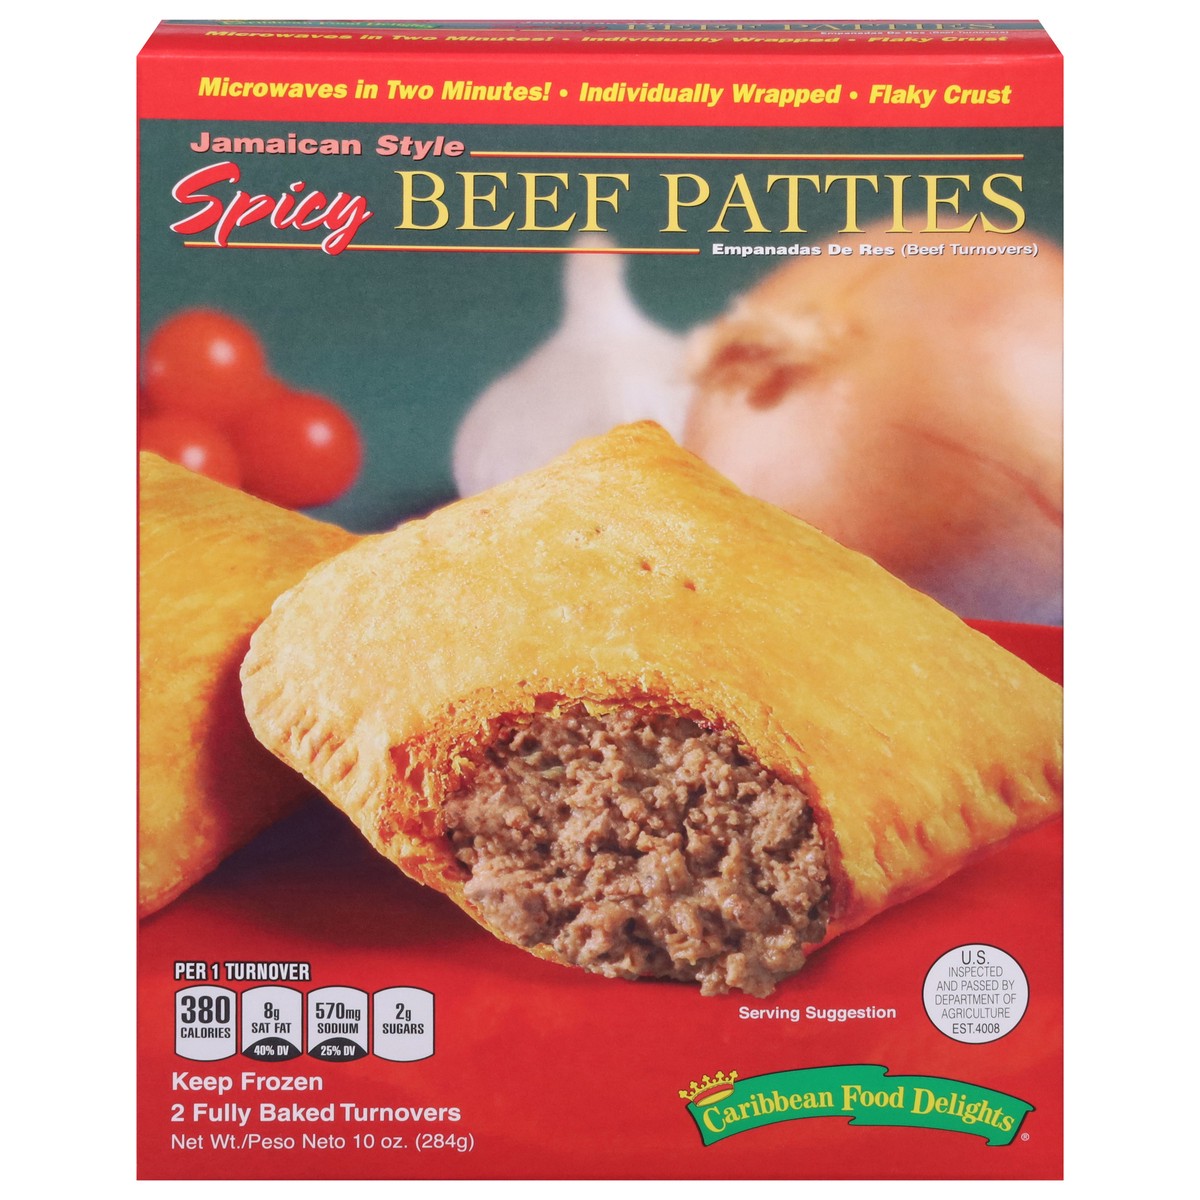 slide 3 of 17, Caribbean Food Delights Jamaican Style Spicy Beef Patties Turnovers 2 ea, 2 ct